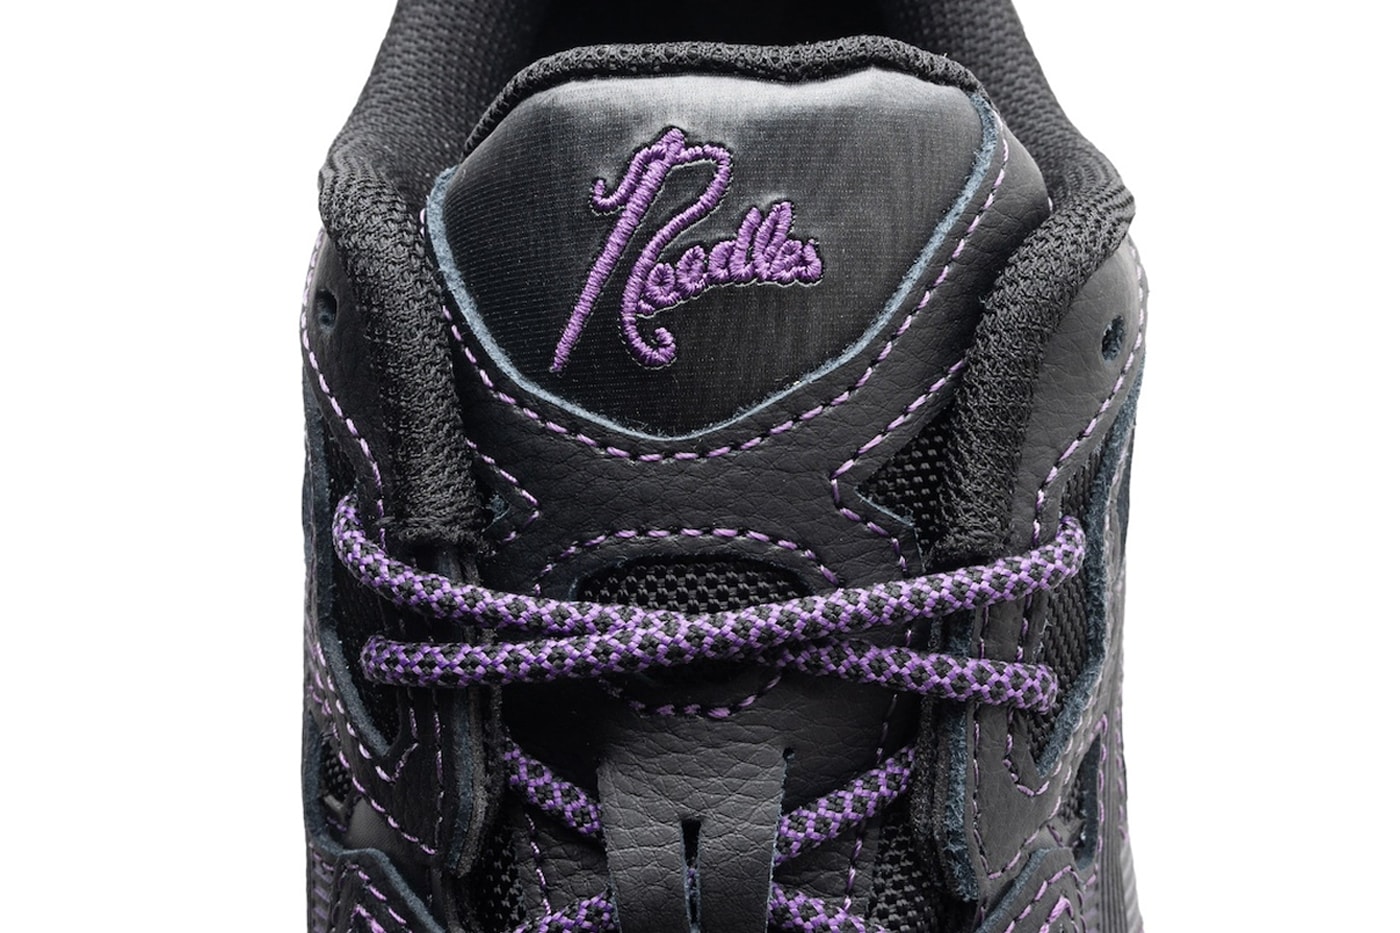 Official Look at the NEEDLES x ASICS GEL-NYC Collaboration 1201B008-001 release info black purple running shoe footwear